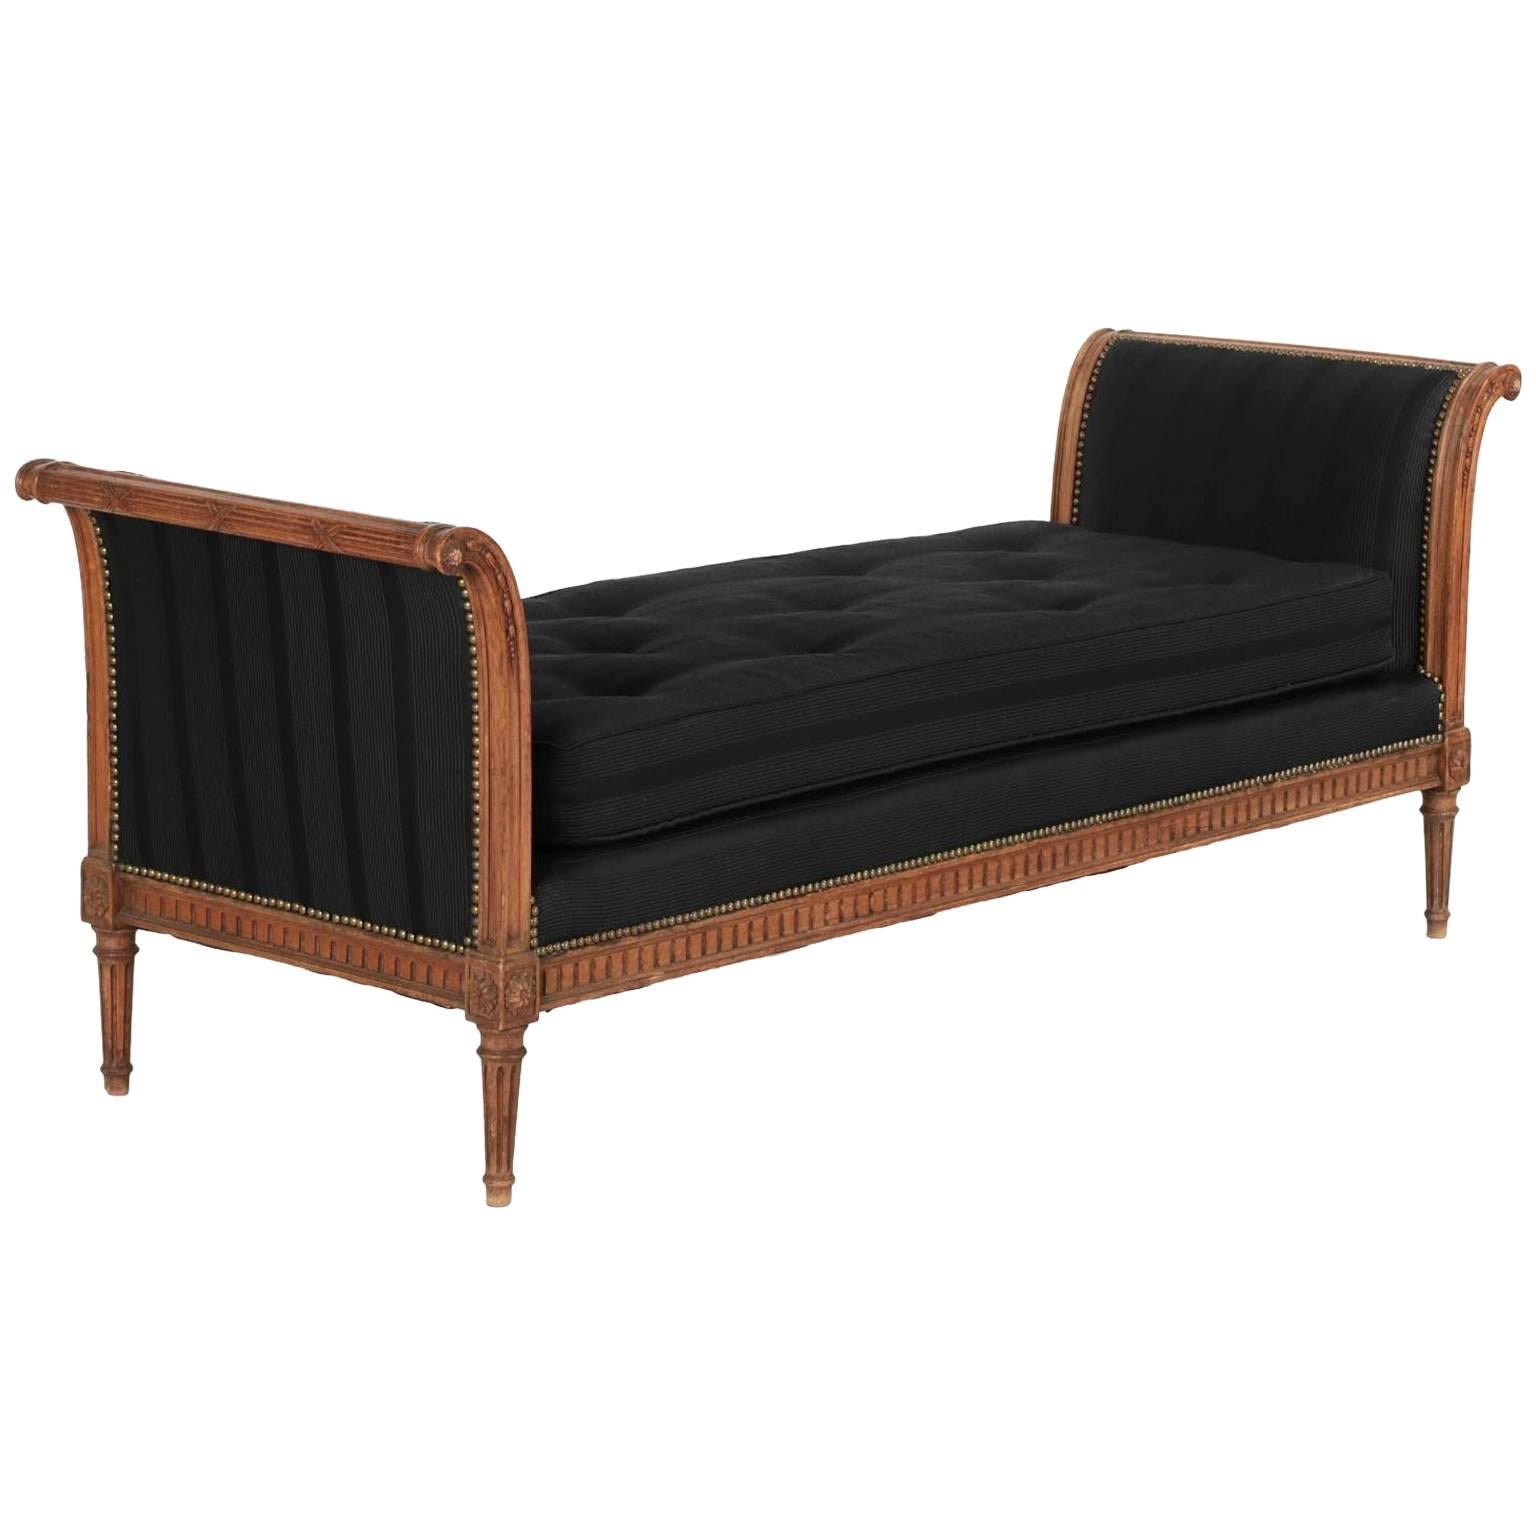 Carved Fruitwood Settee in the French Louis XVI Taste, 19th Century